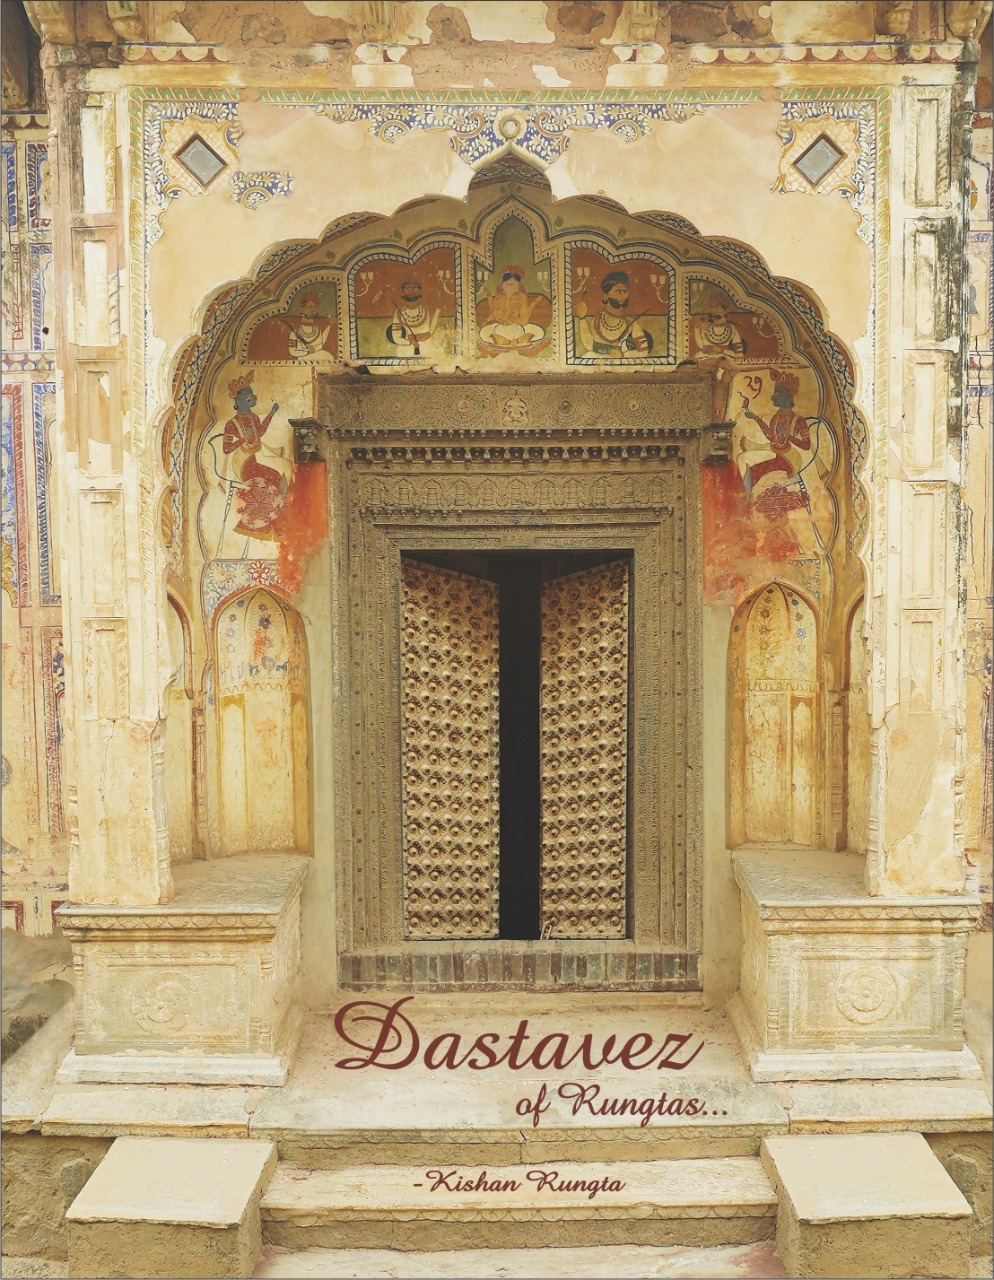 Curtain Raiser Press Release - BOOK LAUNCH OF ‘DASTAVEZ OF RUNGTAS’ TO BE HELD ON 30 APRIL AT ITC RAJPUTANA